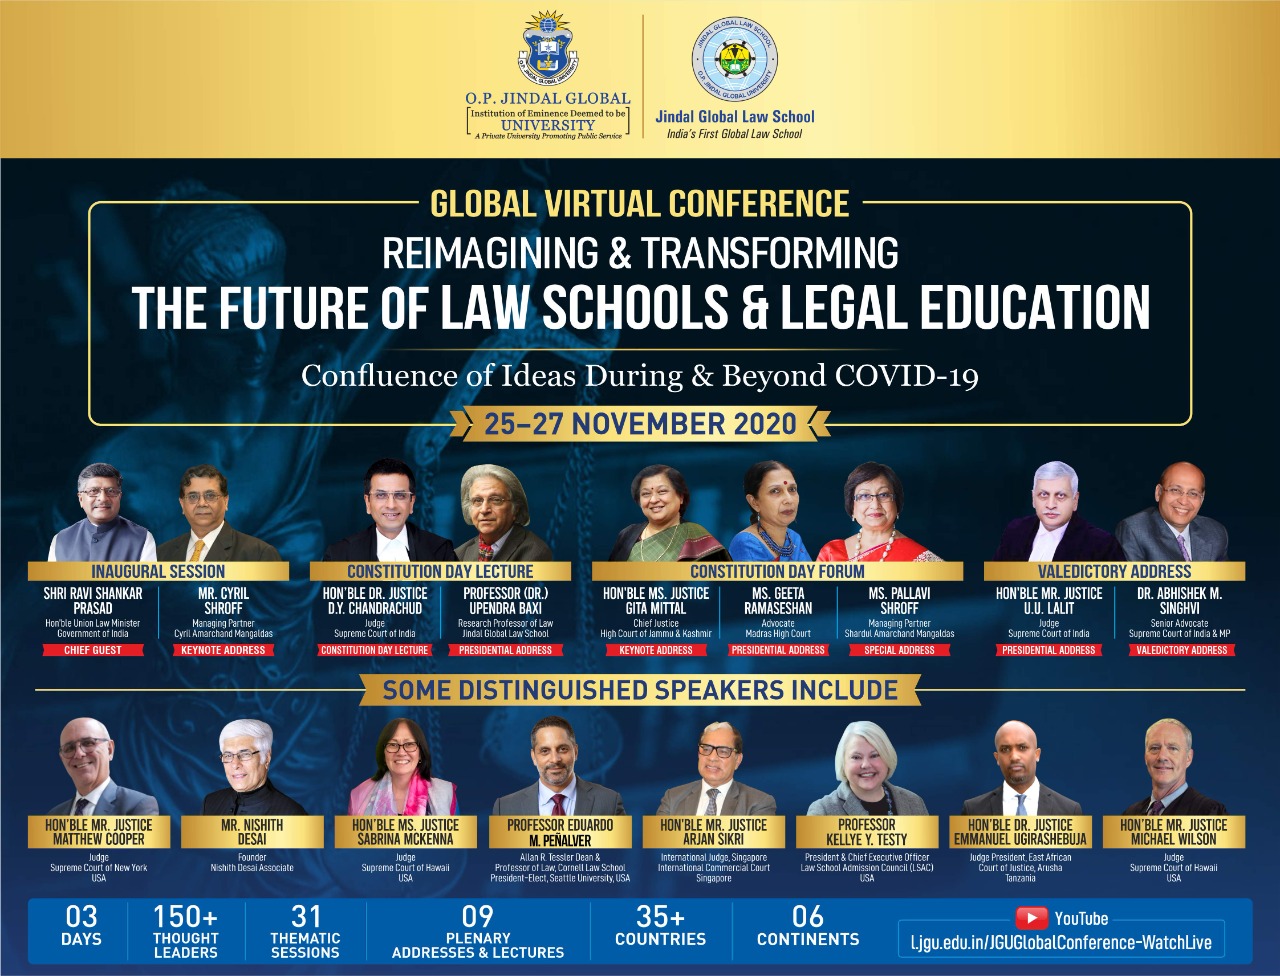 JGLS To Organize Global Virtual Conference On Transforming Future Of Law Schools & Legal Education Through 170 Leaders From 35+ Countries